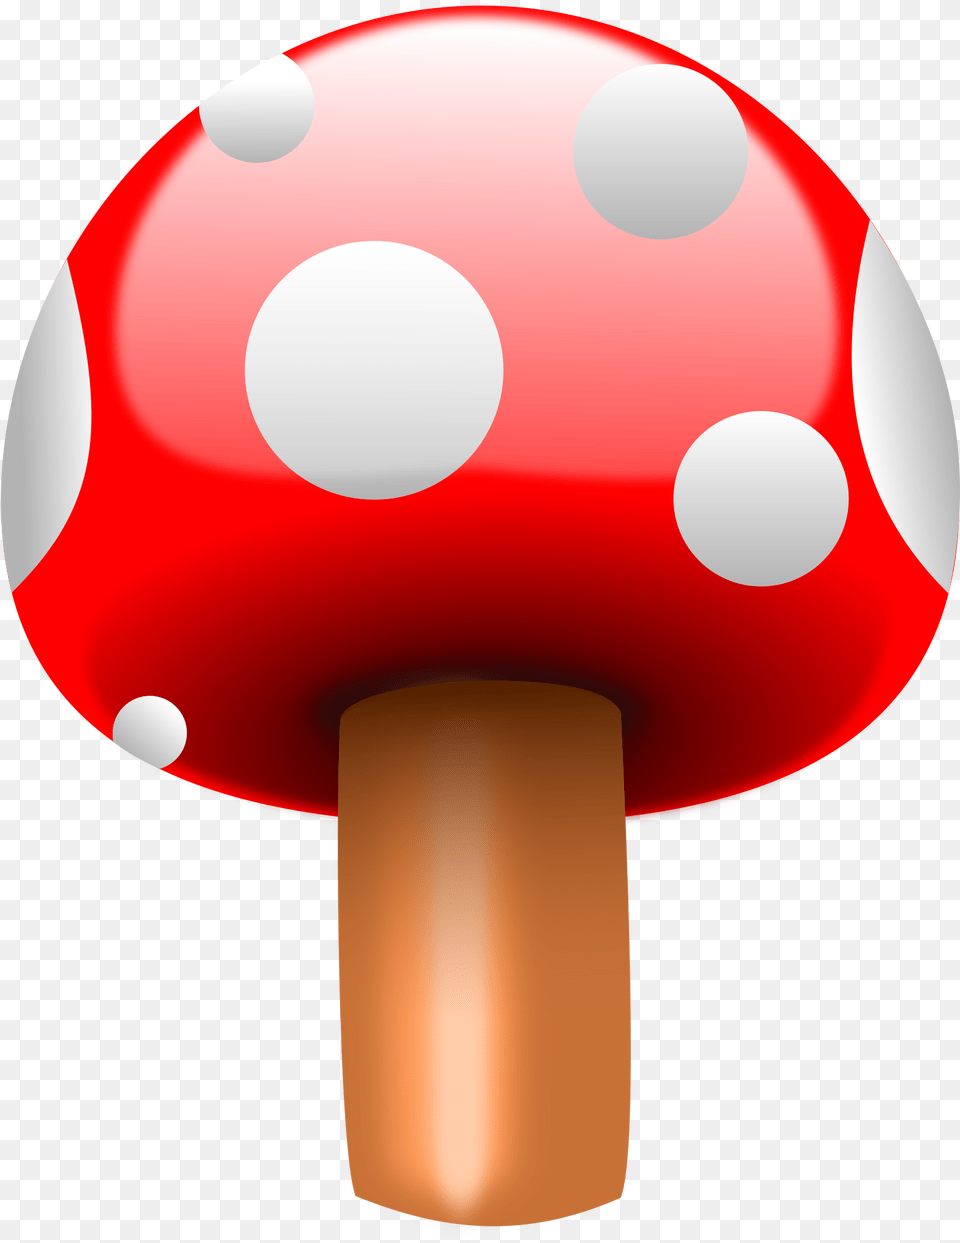 Mushroom With White Dots Clipart, Agaric, Fungus, Plant, Amanita Free Transparent Png